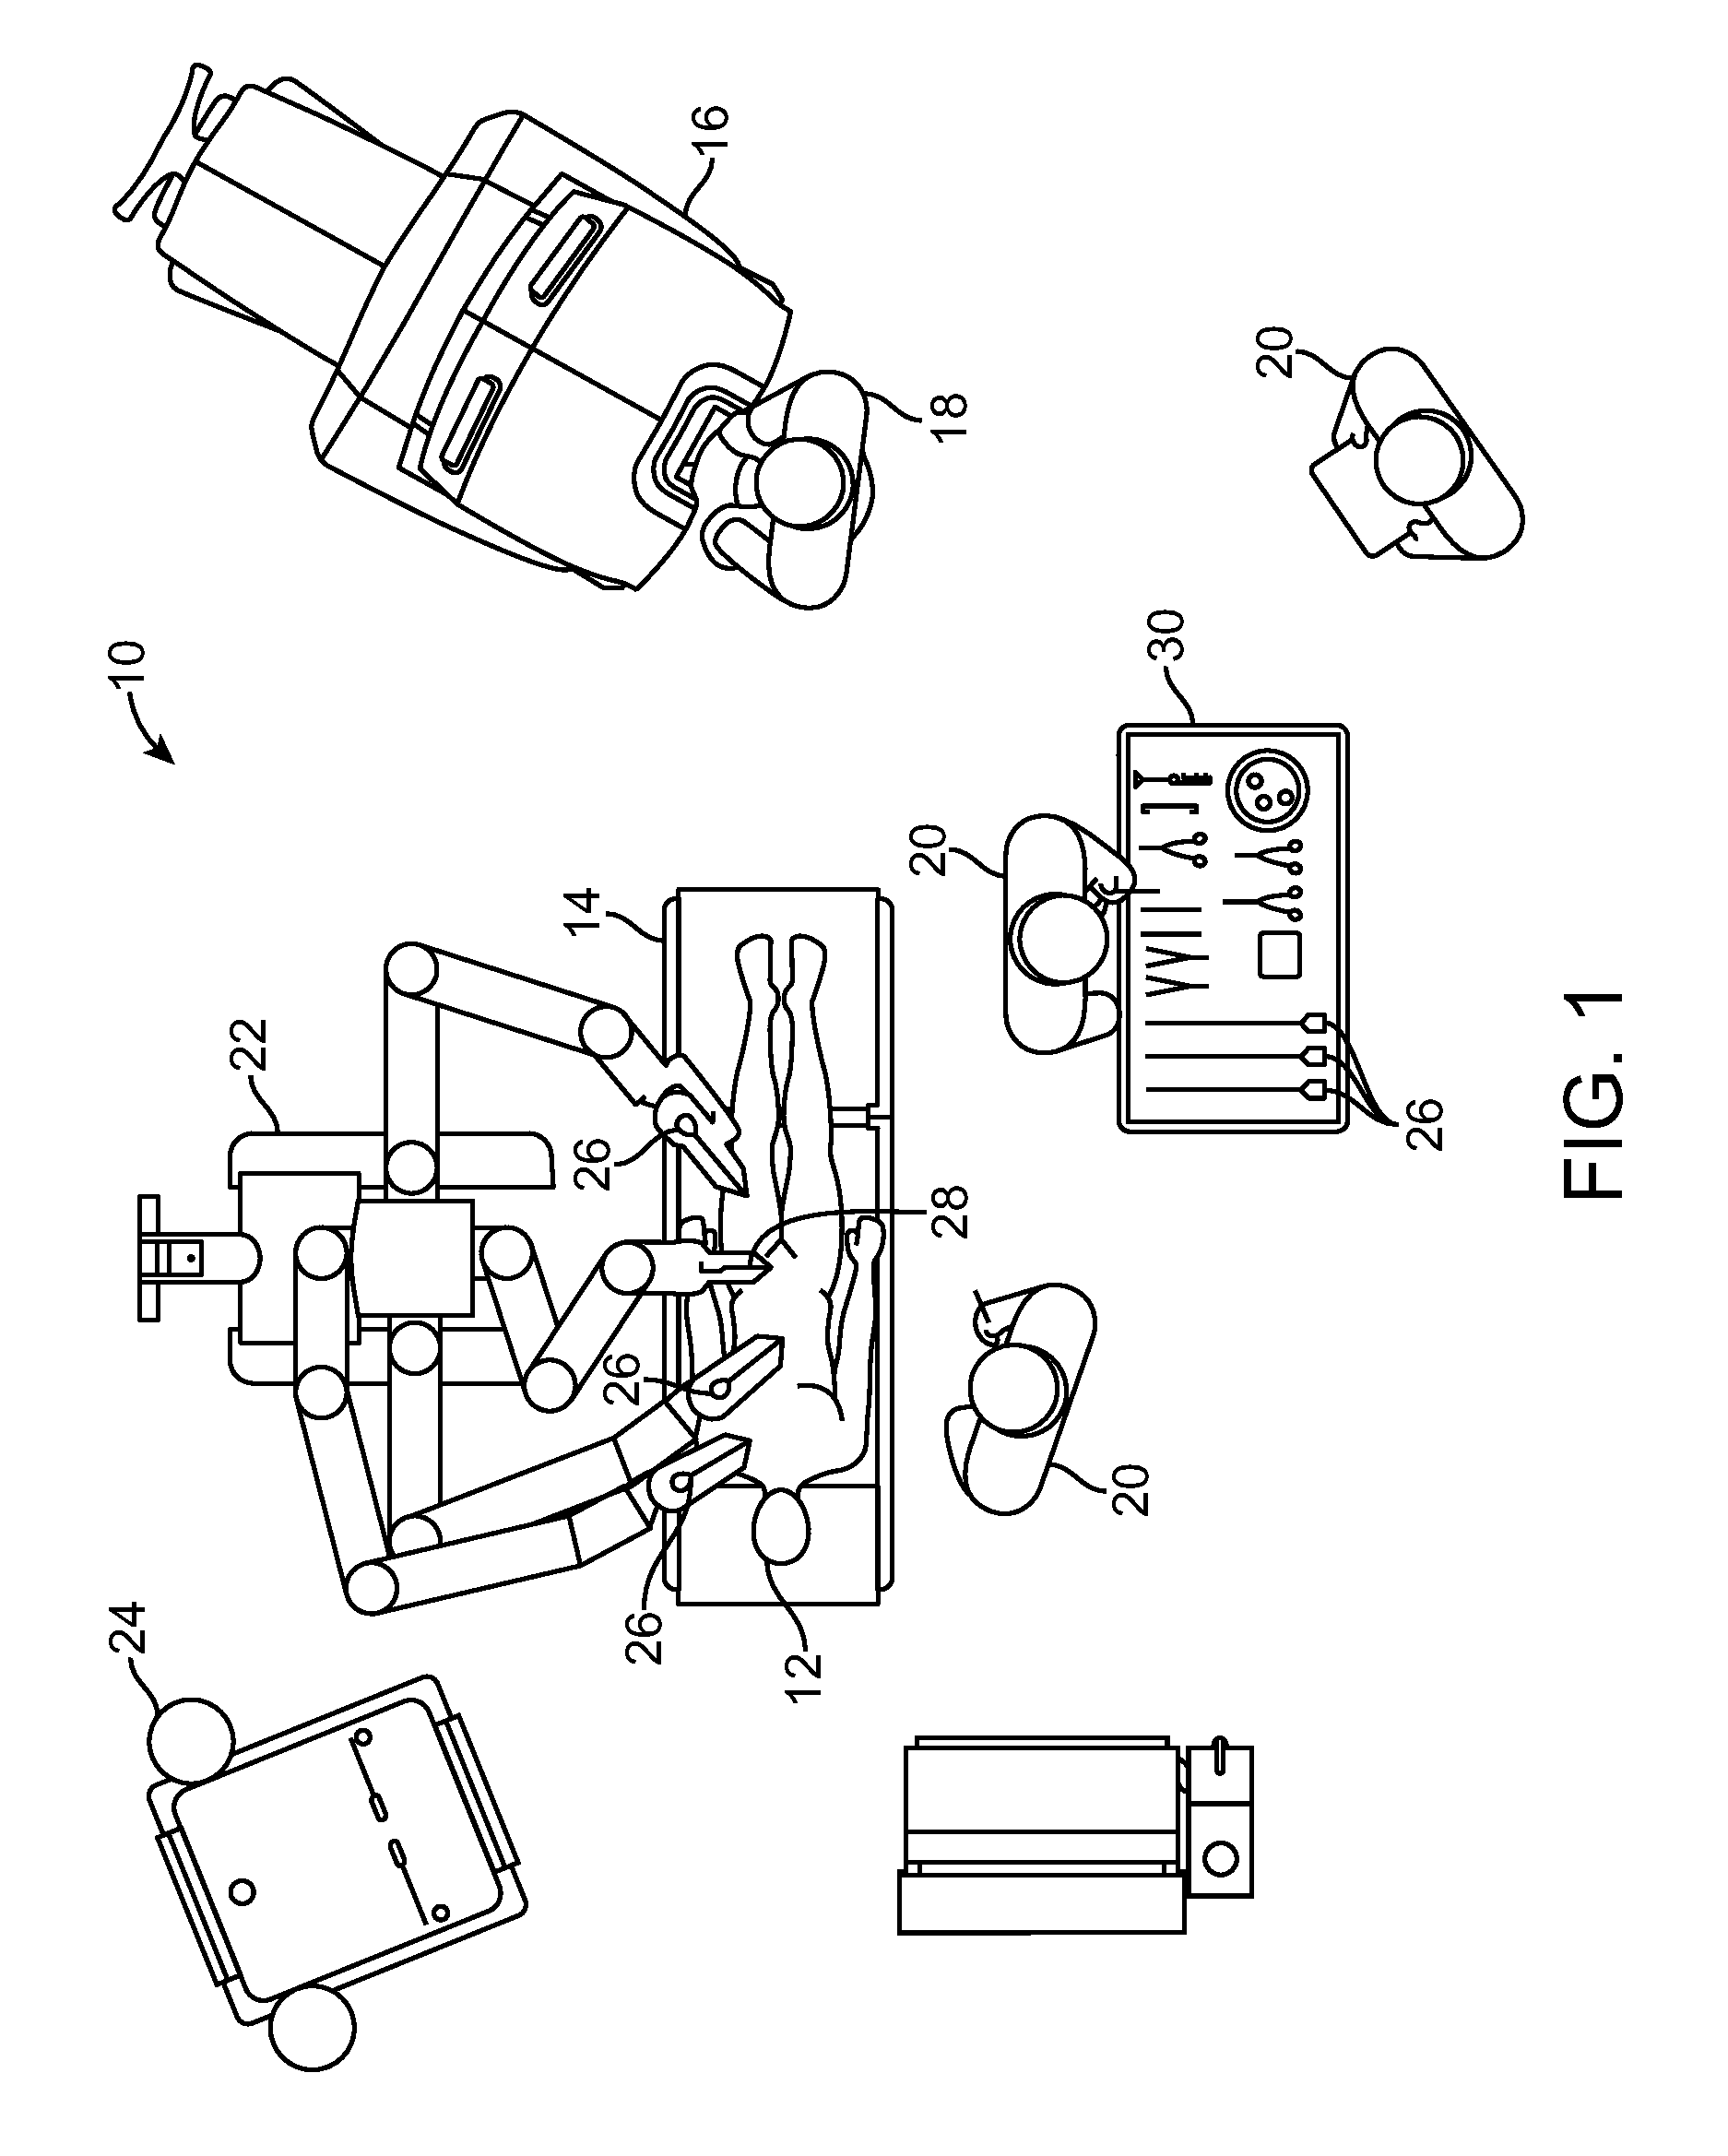 Configuration marker design and detection for instrument tracking